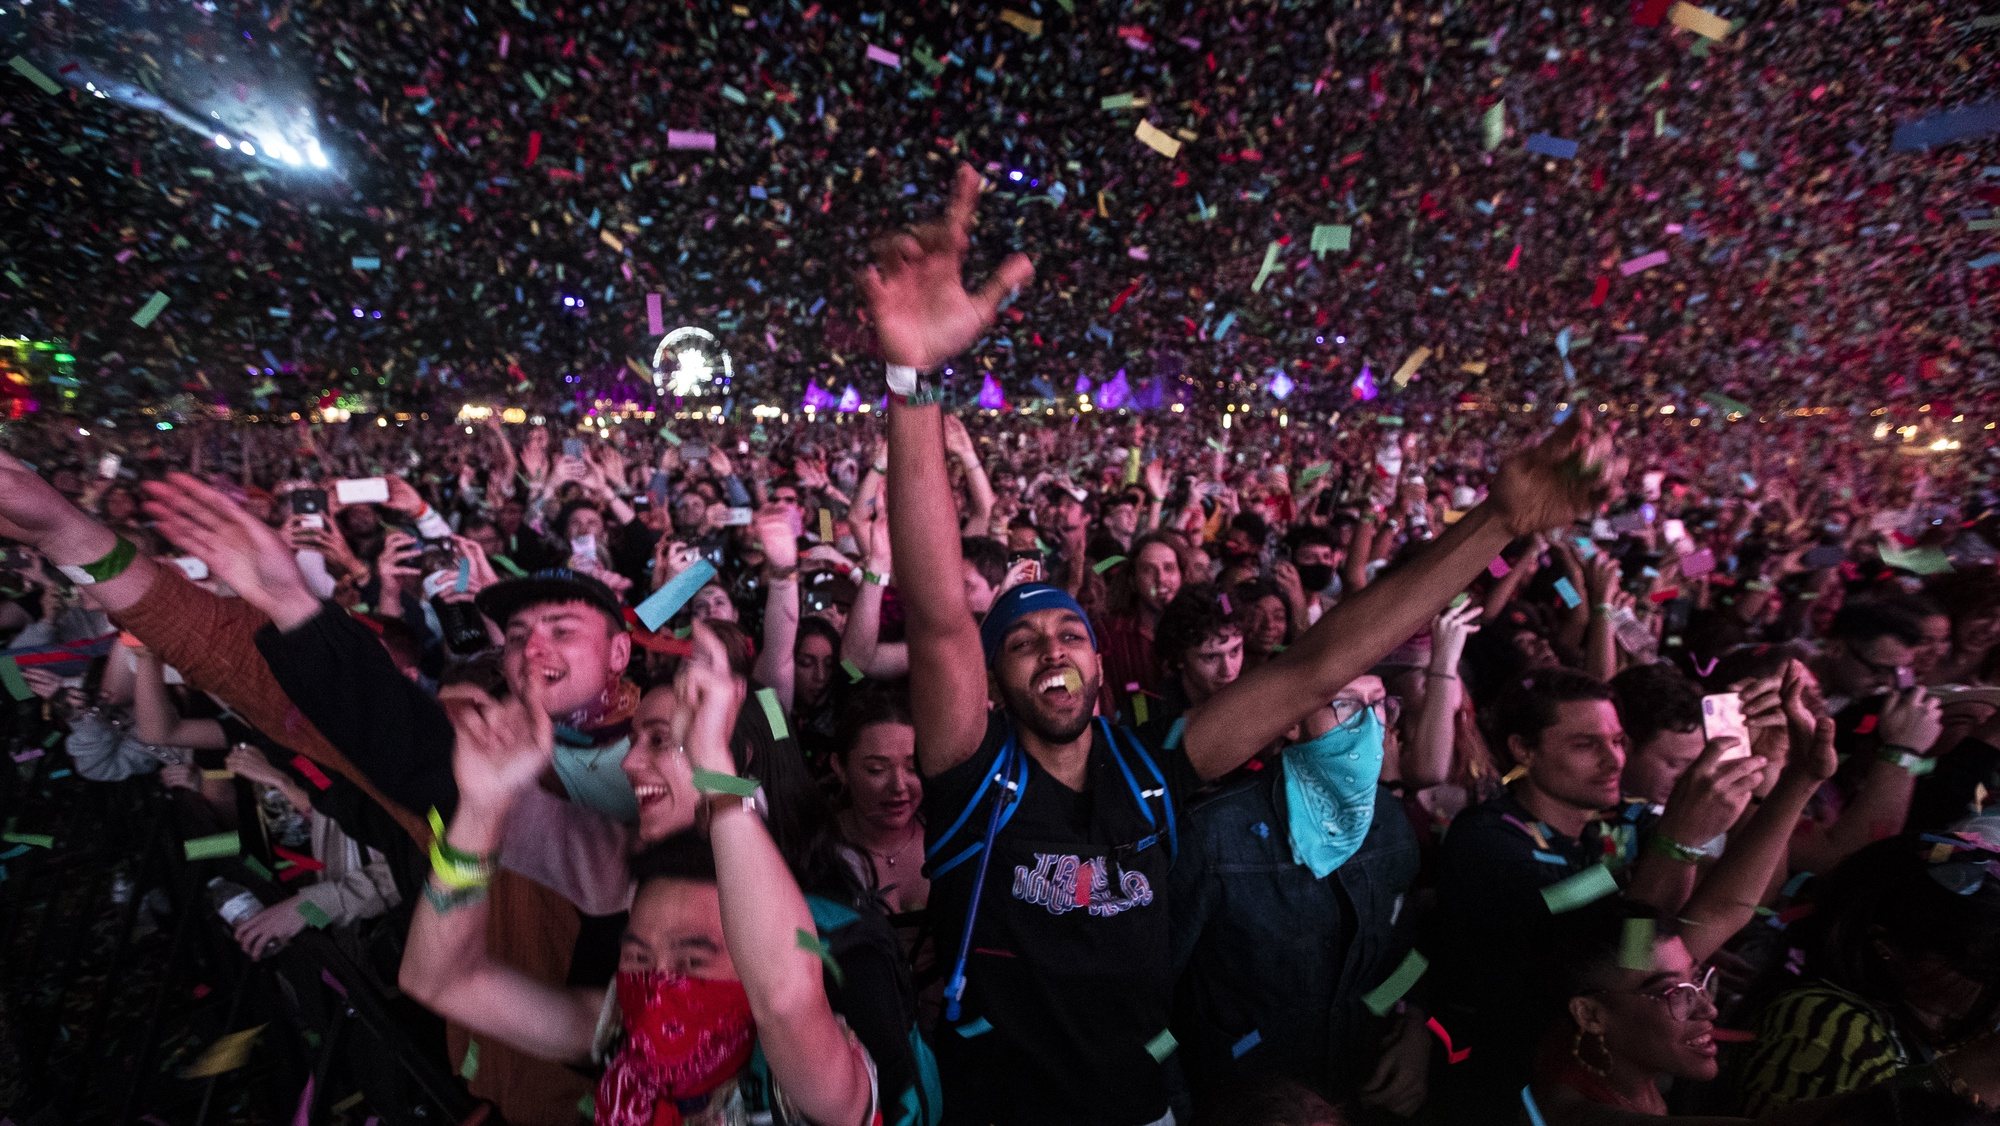 epa08974292 (FILE) - Confetti falls on the crowd as Australian band Tame Impala performs on stage during the Coachella Valley Music and Arts Festival in Indio near Palm Spring, California, USA, late 20 April 2019 (reissued 30 January 2021). The Riverside County Public Health Office announced on 29 January that the Coachella Festival and the Stagecoach Festival, both scheduled for April 2021, have been cancelled over coronavirus woes. The two festivals had already been postponed in April 2020 during the early stages of the Covid-19 pandemic.  EPA/ETIENNE LAURENT